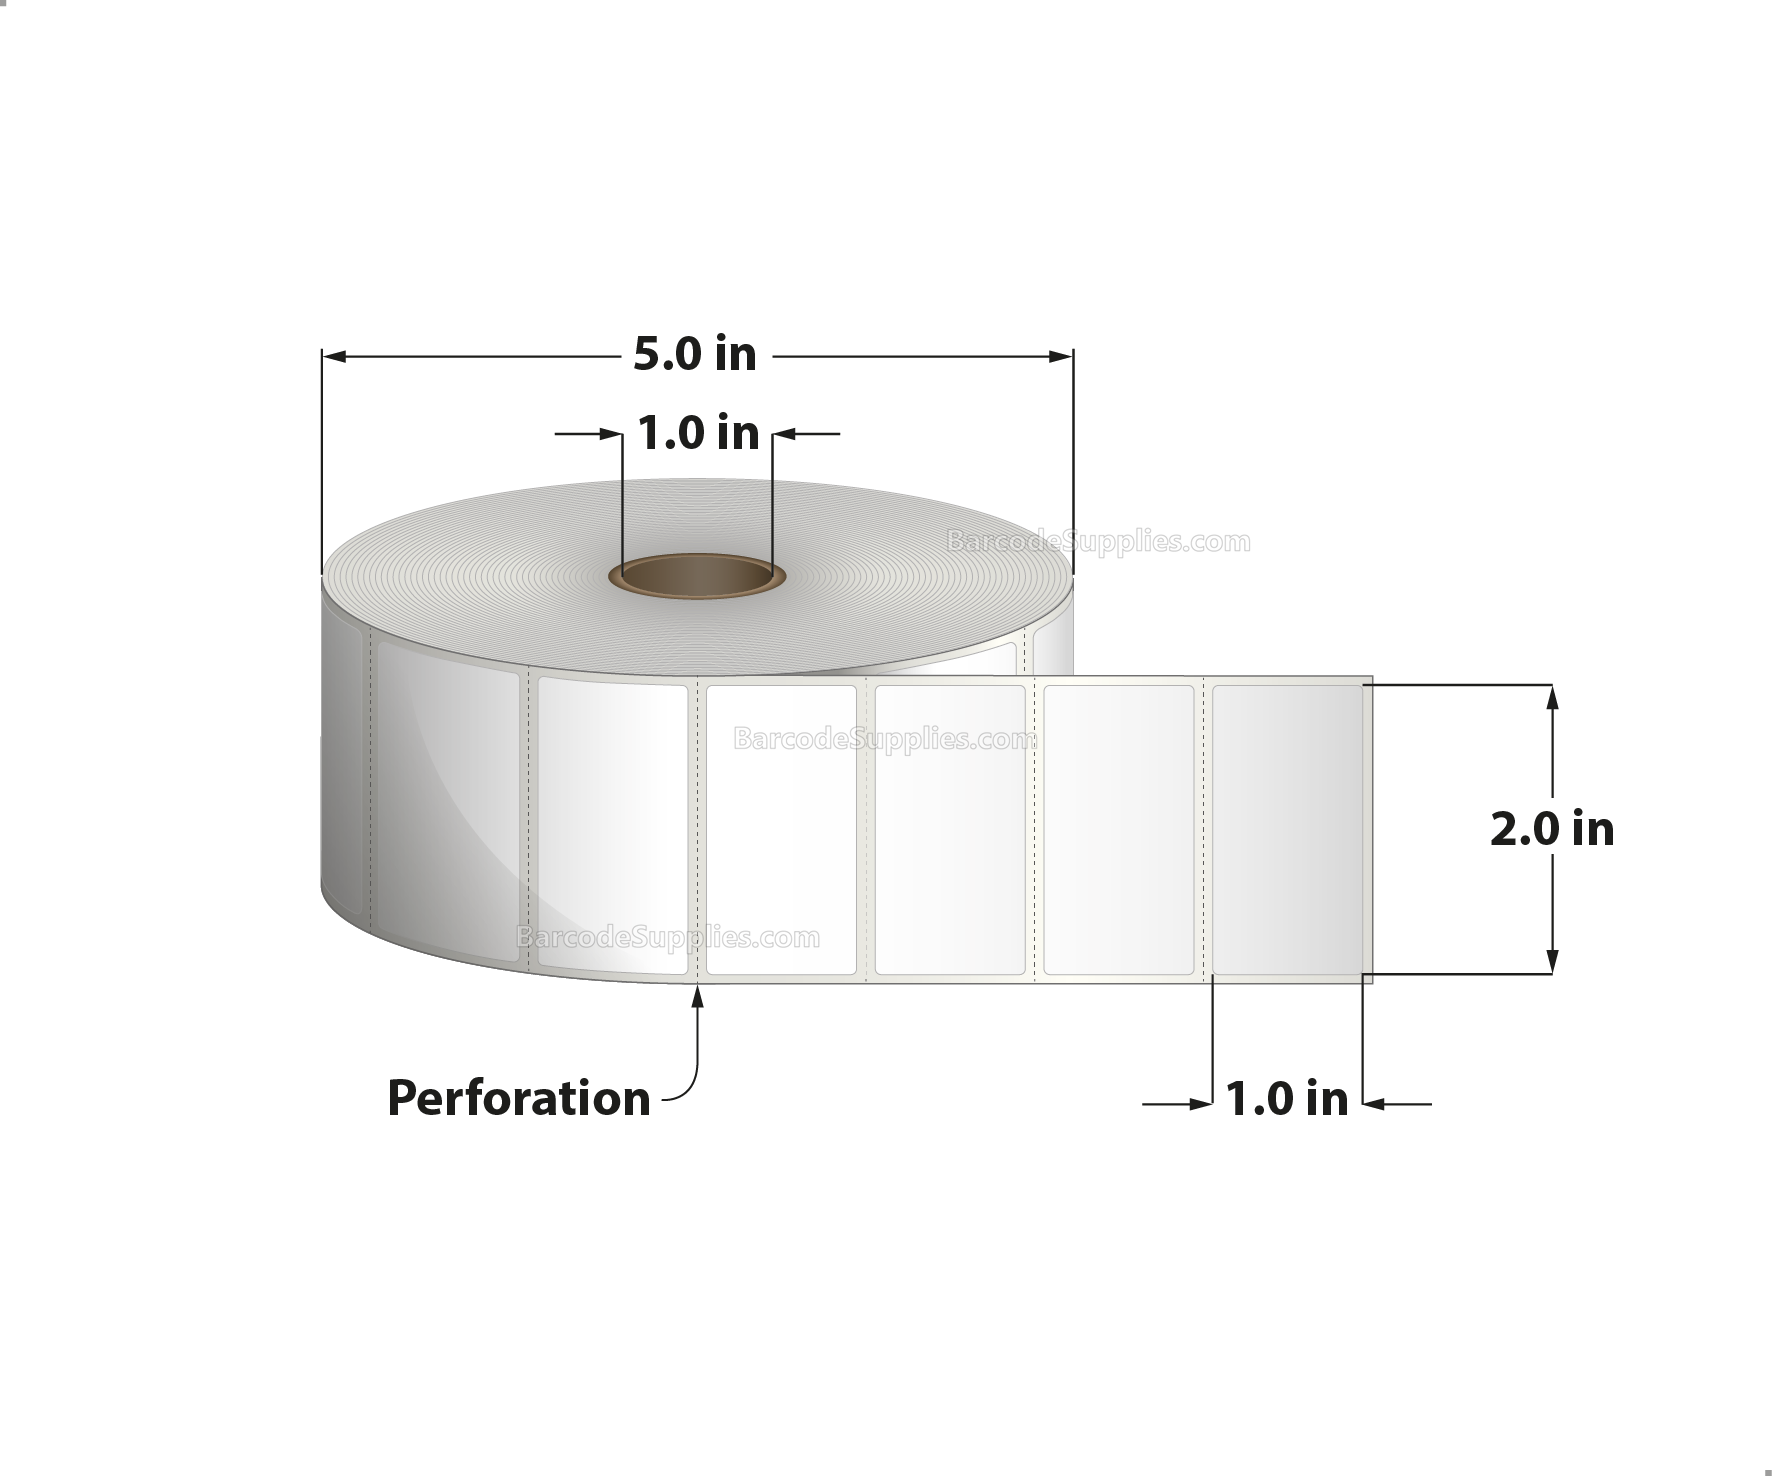 2 x 1 Thermal Transfer White Labels With Permanent Acrylic Adhesive - Perforated - 2300 Labels Per Roll - Carton Of 4 Rolls - 9200 Labels Total - MPN: TH21-15PTT